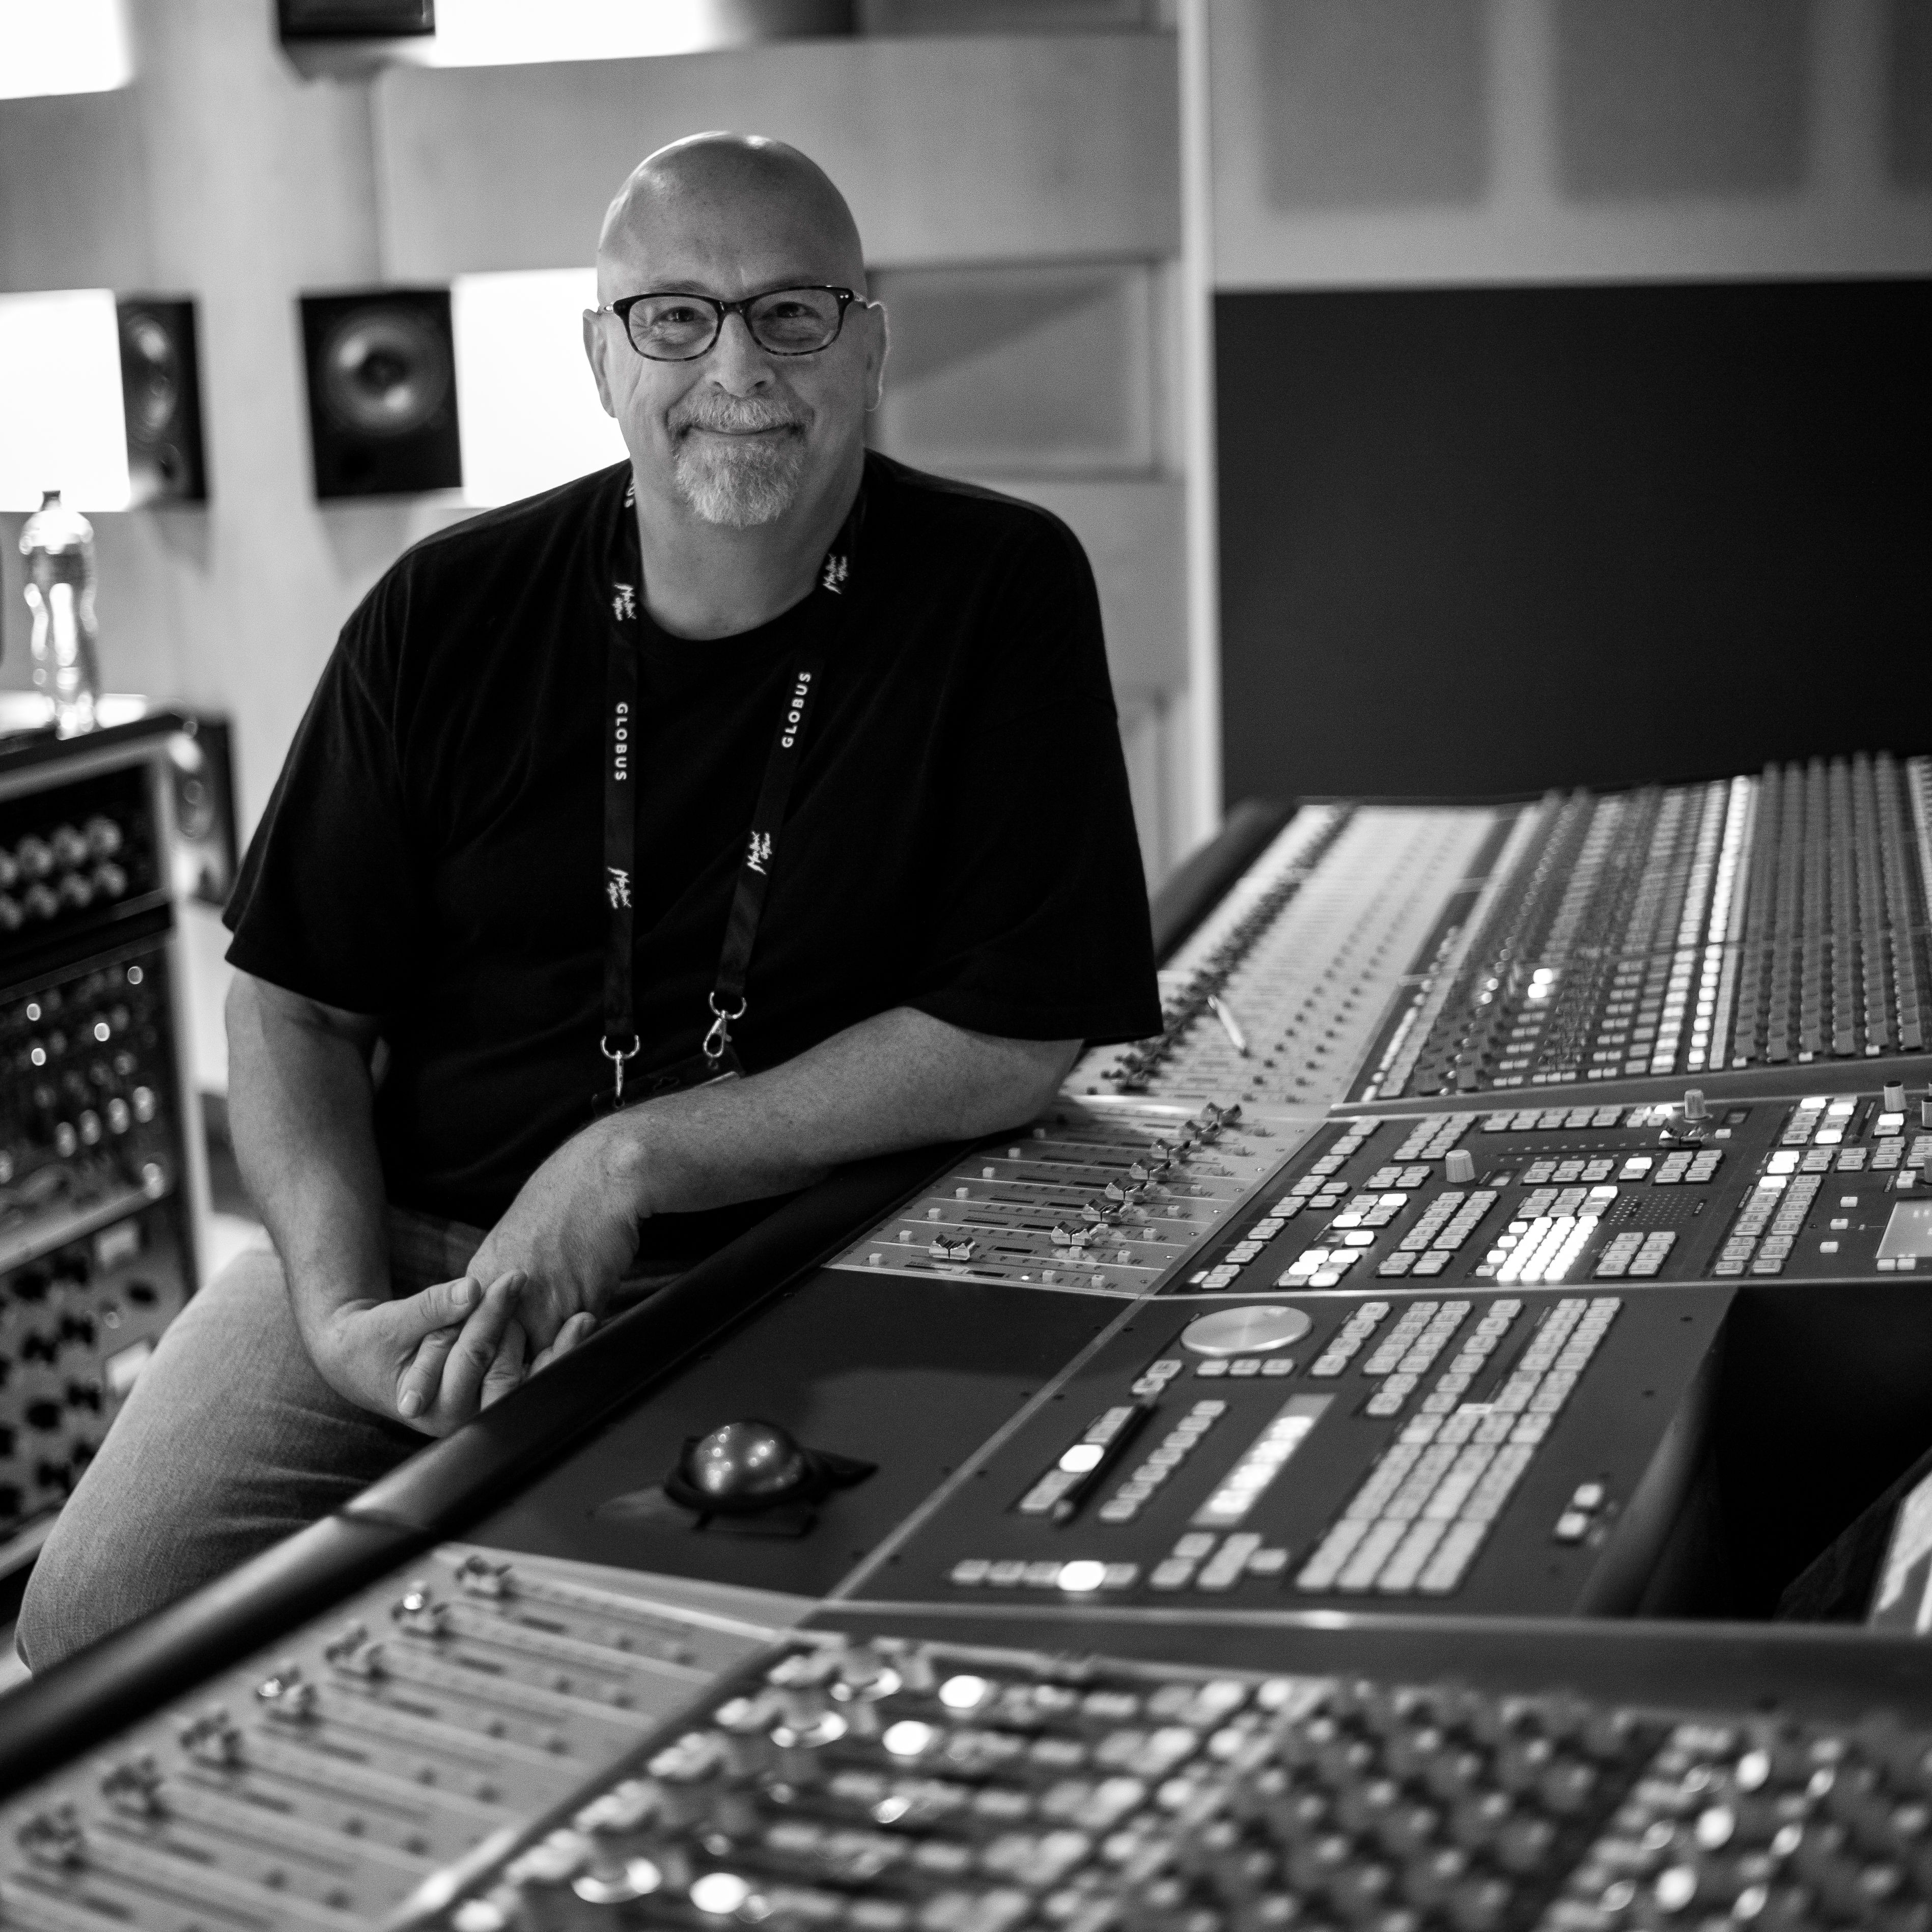 HEAR's John Harris worked with partner Jody Elff to develop a reliable and seamless console-based remote-mixing workflow